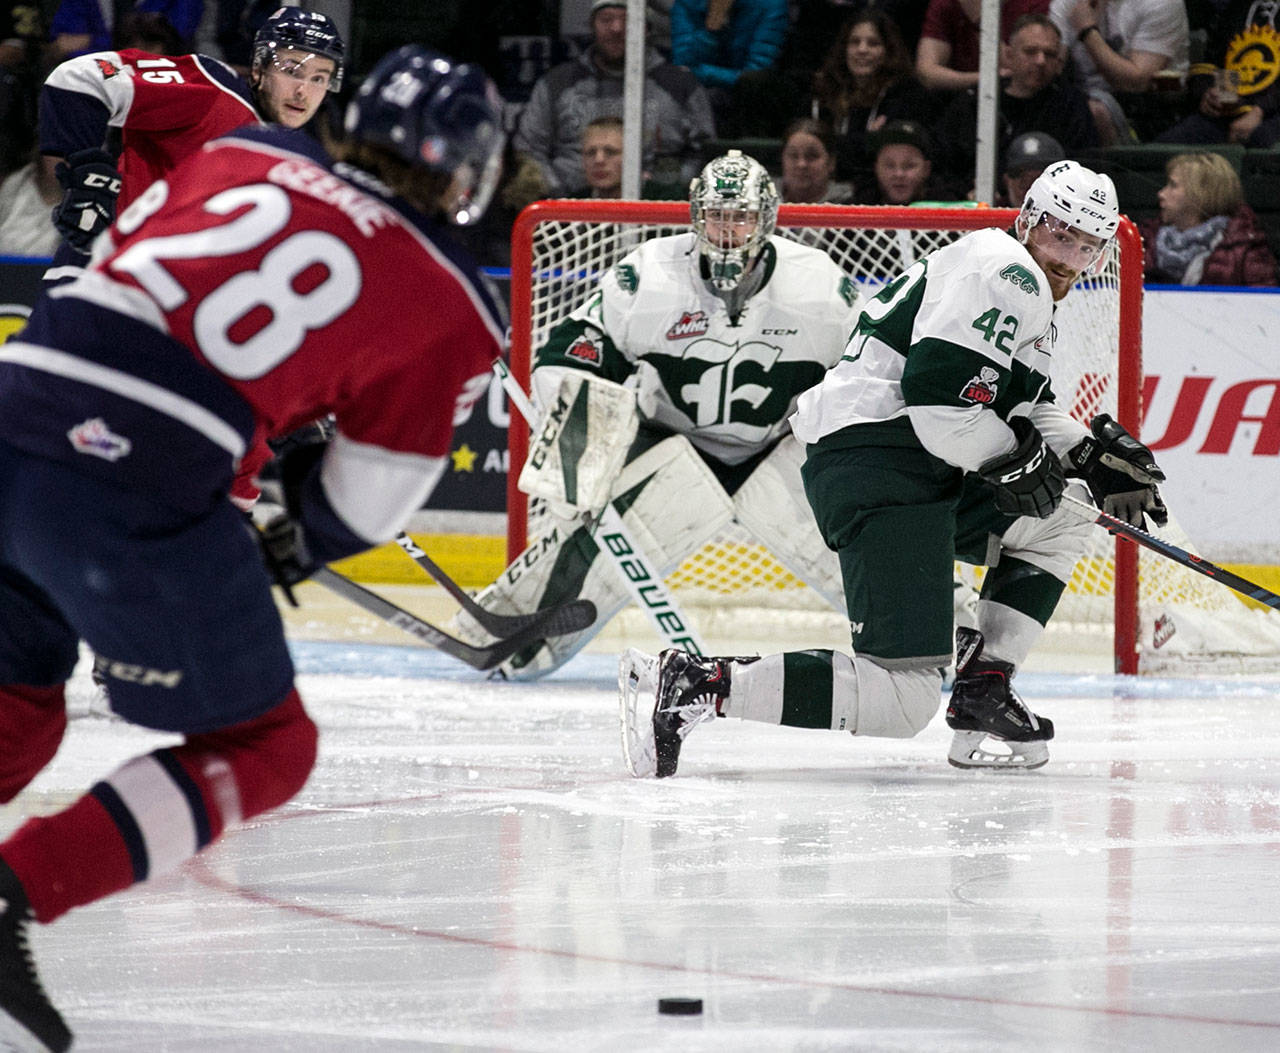 Tri-City’s Morgan Geekie (28) attempts a shot with the Silvertips’ Ondrej Vala (right) and goalie Carter Hart defending during a game on April 20, 2018, at Angel of the Winds Arena in Everett. (Kevin Clark / The Herald)